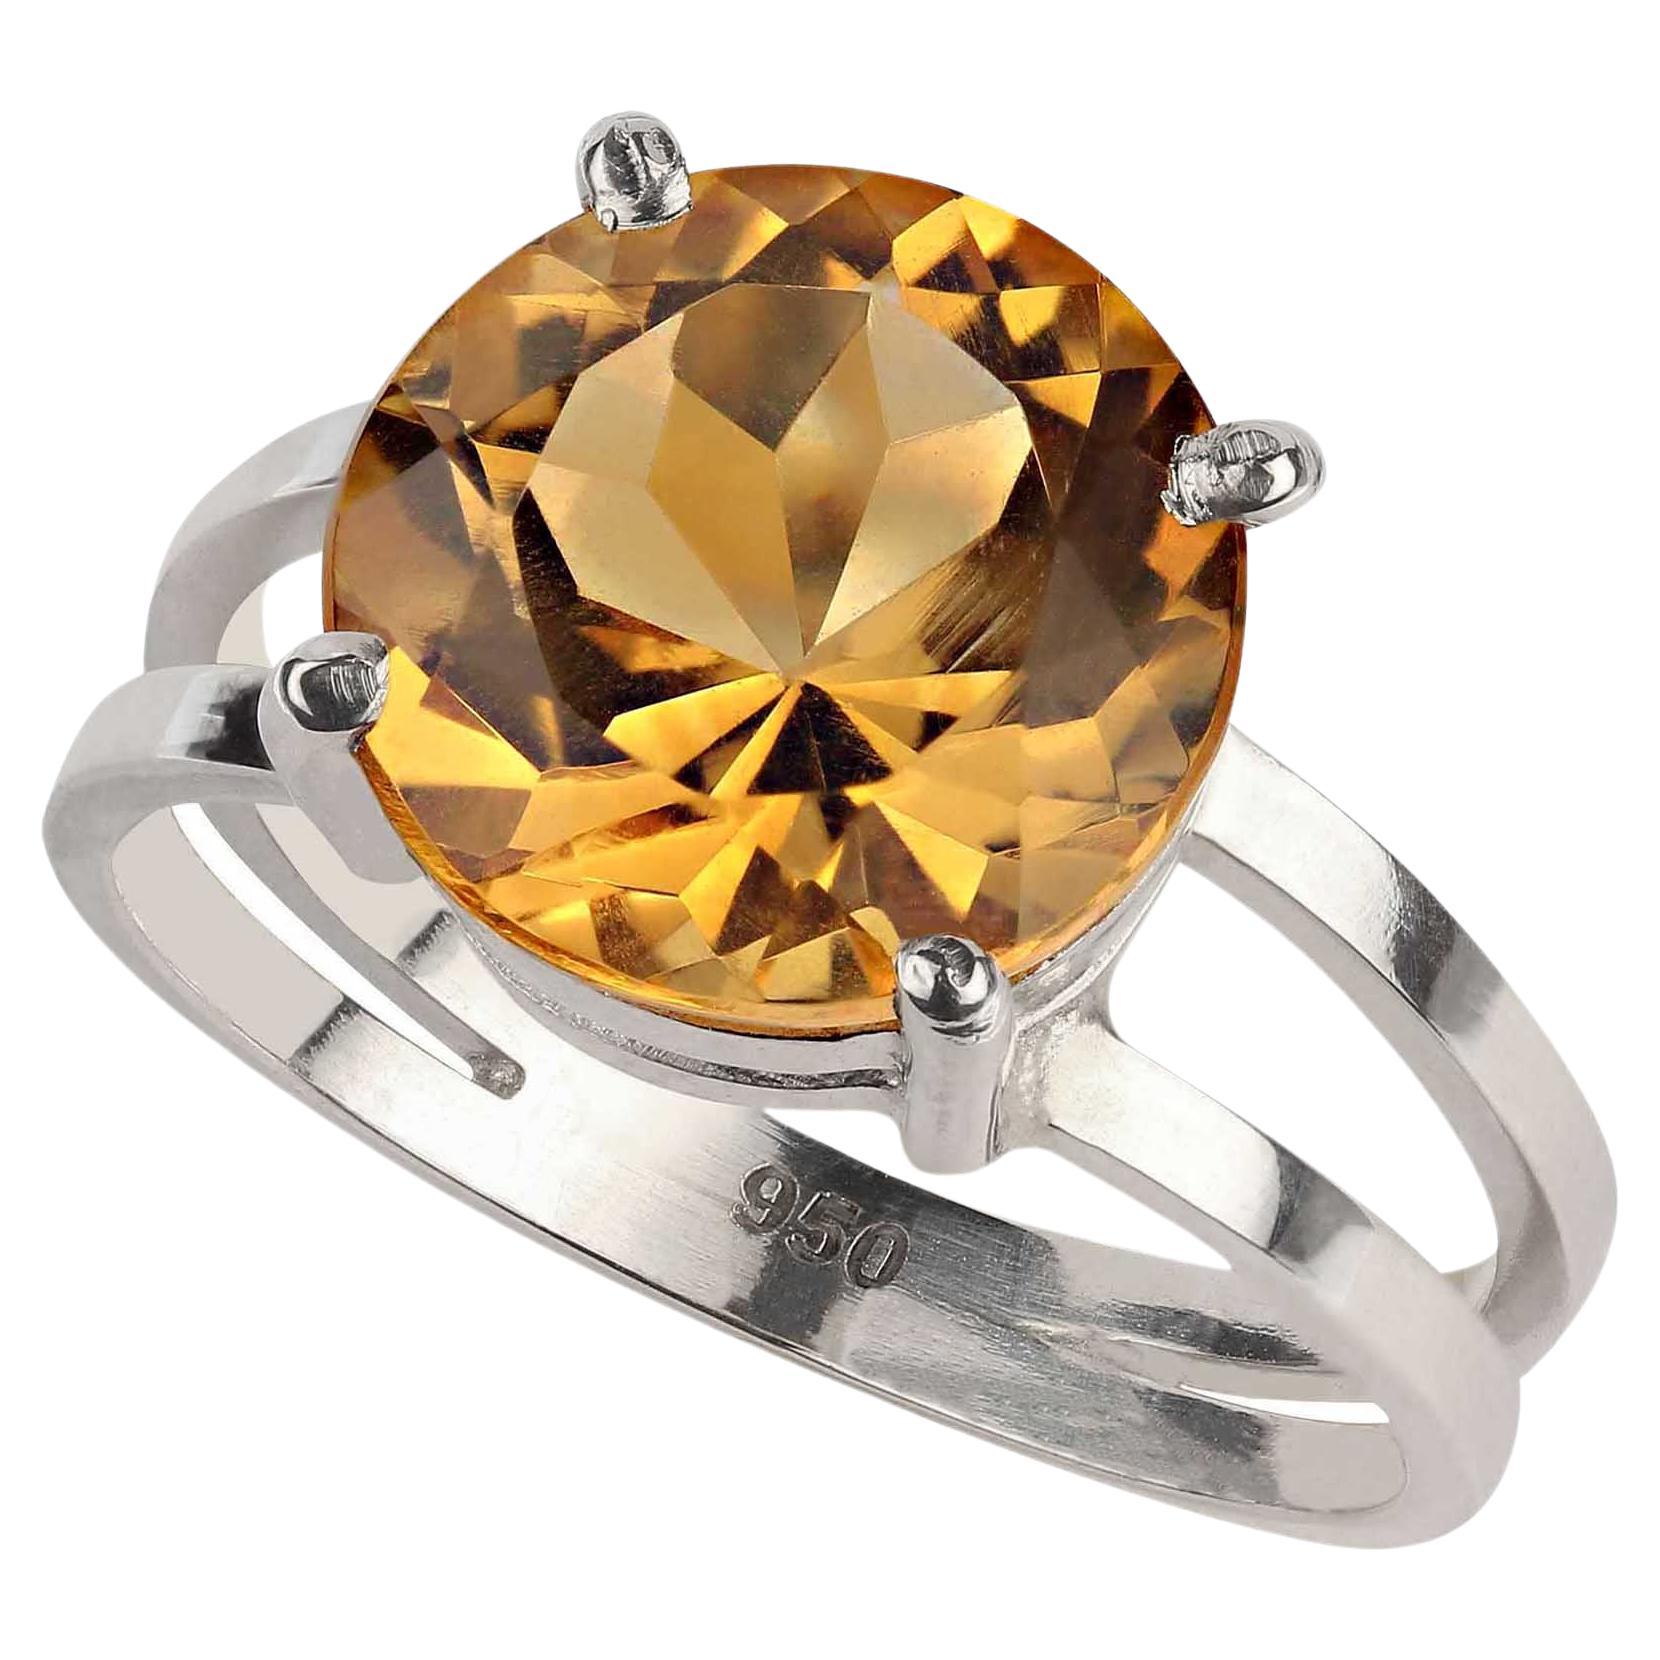 AJD Unusual Round 4.3 Carat Citrine in Sterling Silver Ring